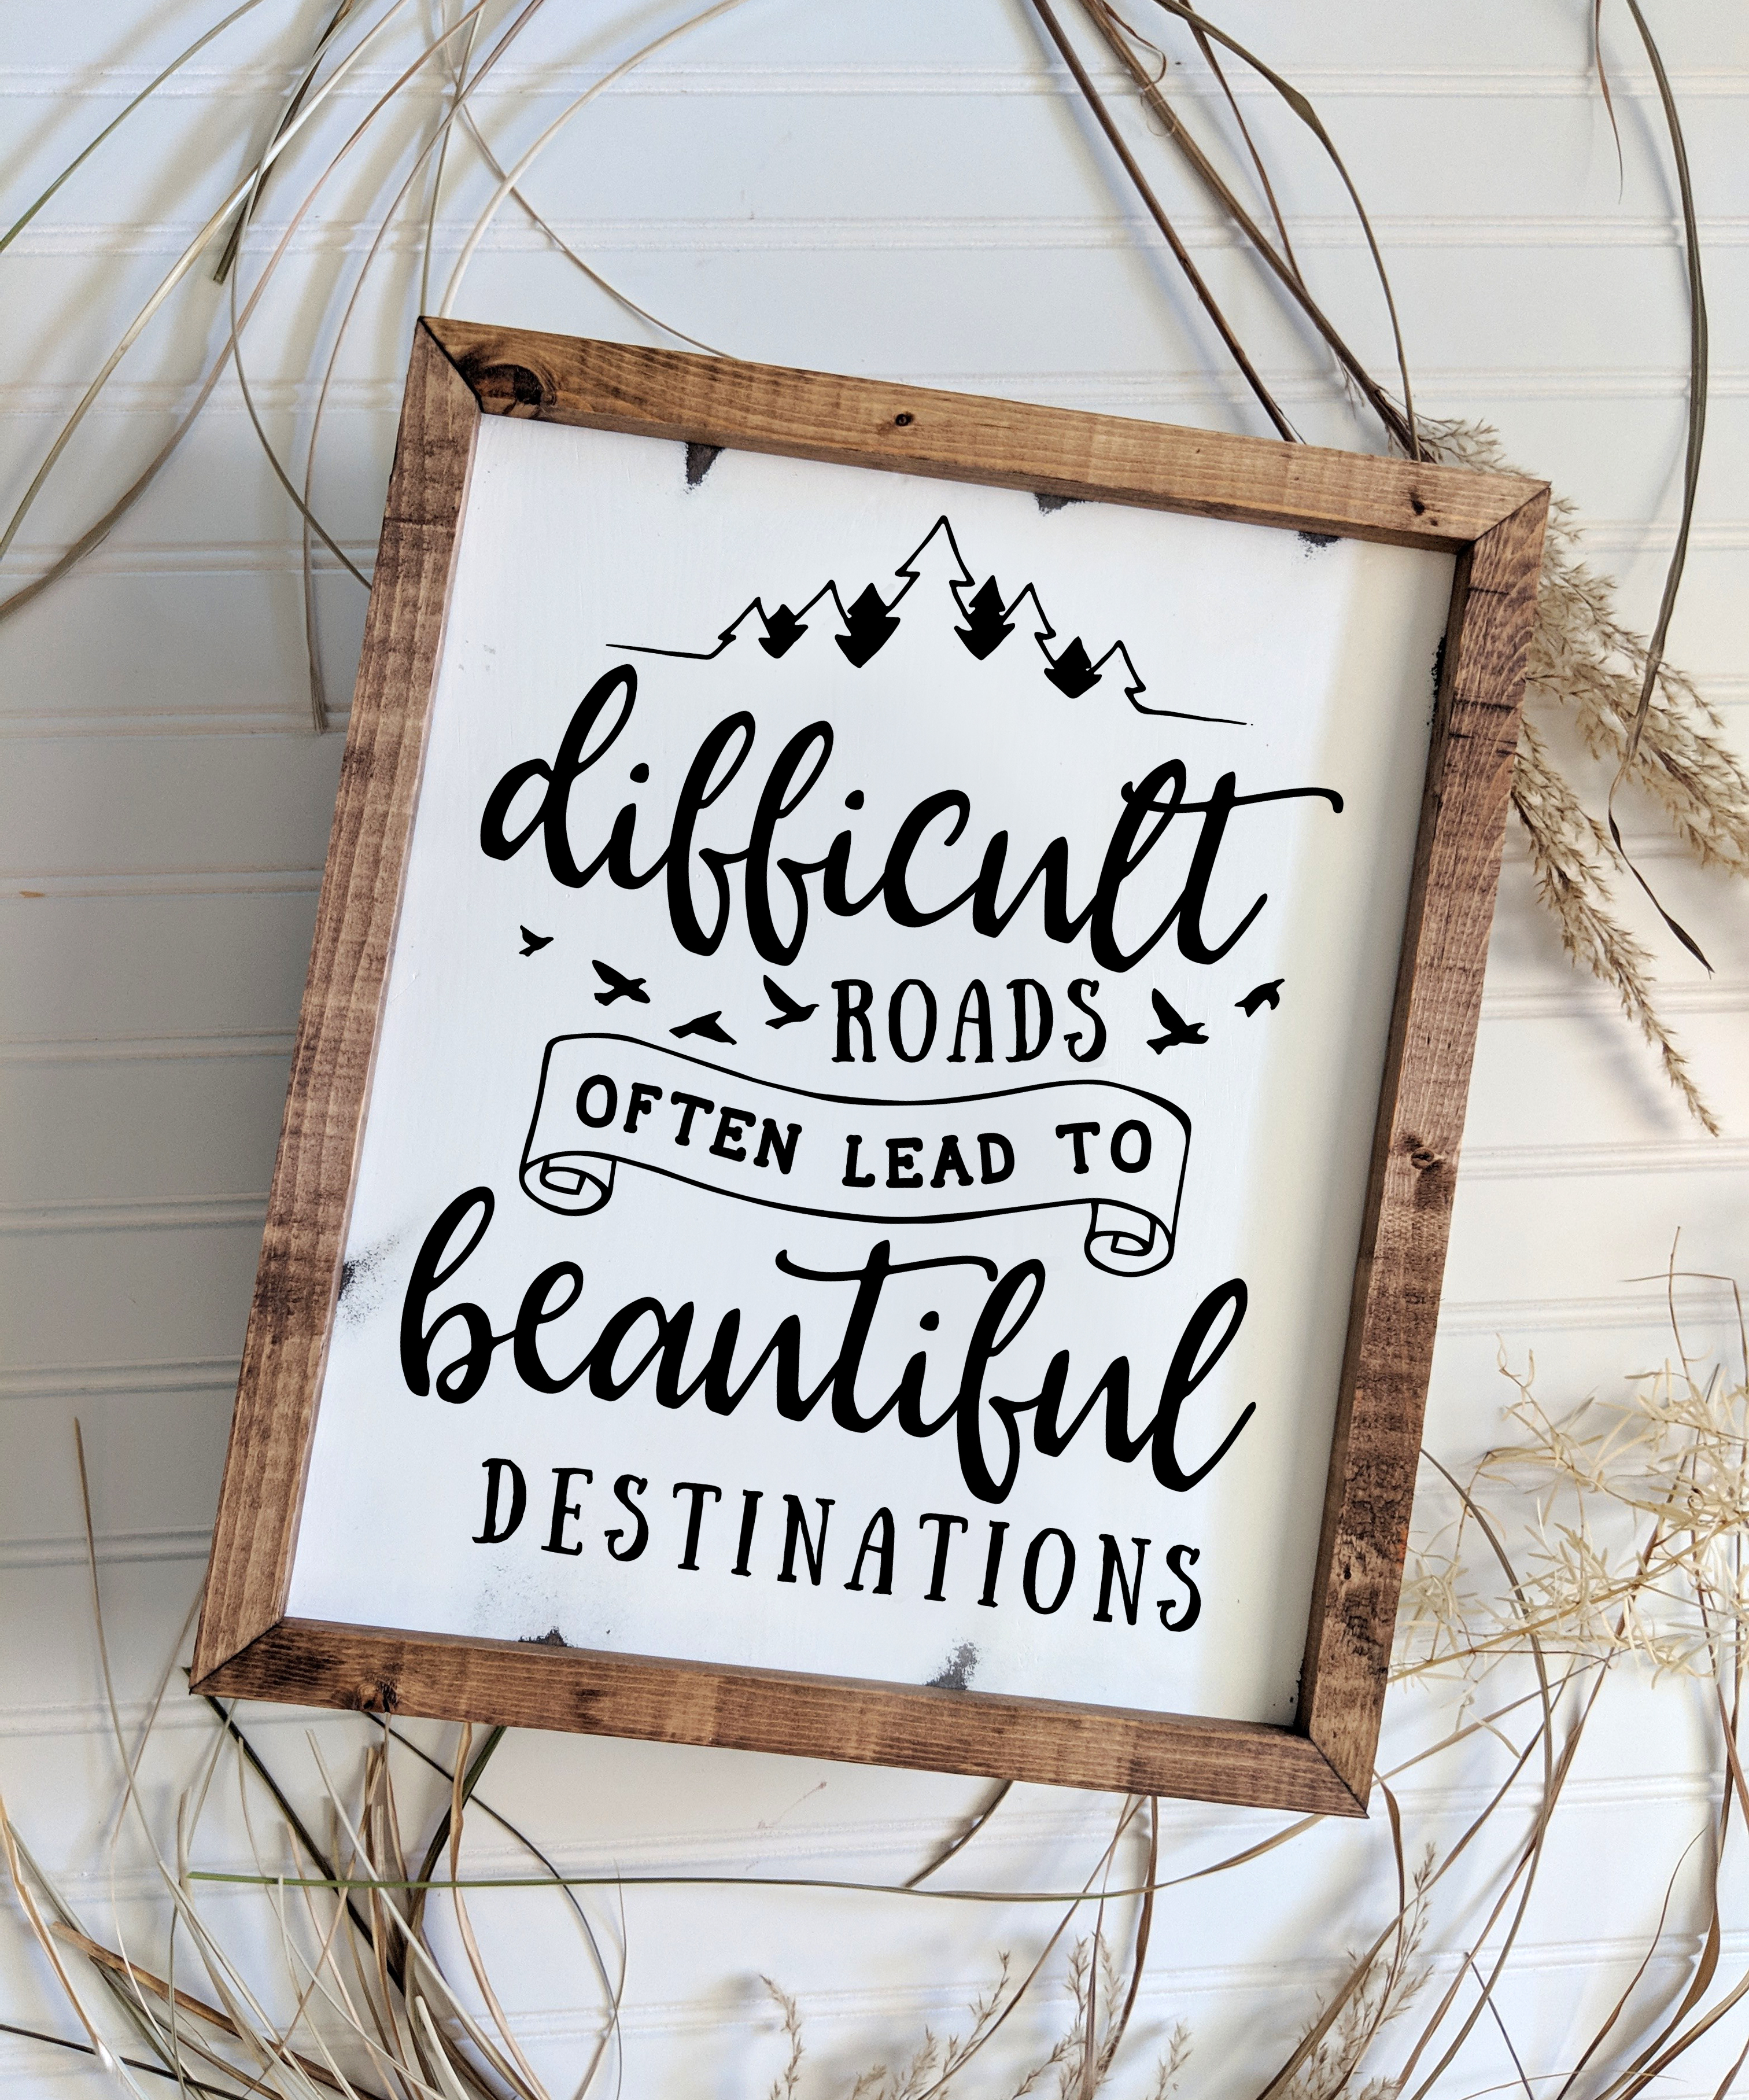 Difficult Roads Beautiful Destinations Mountains 10x3.5" Wood Hanging Wall Sign